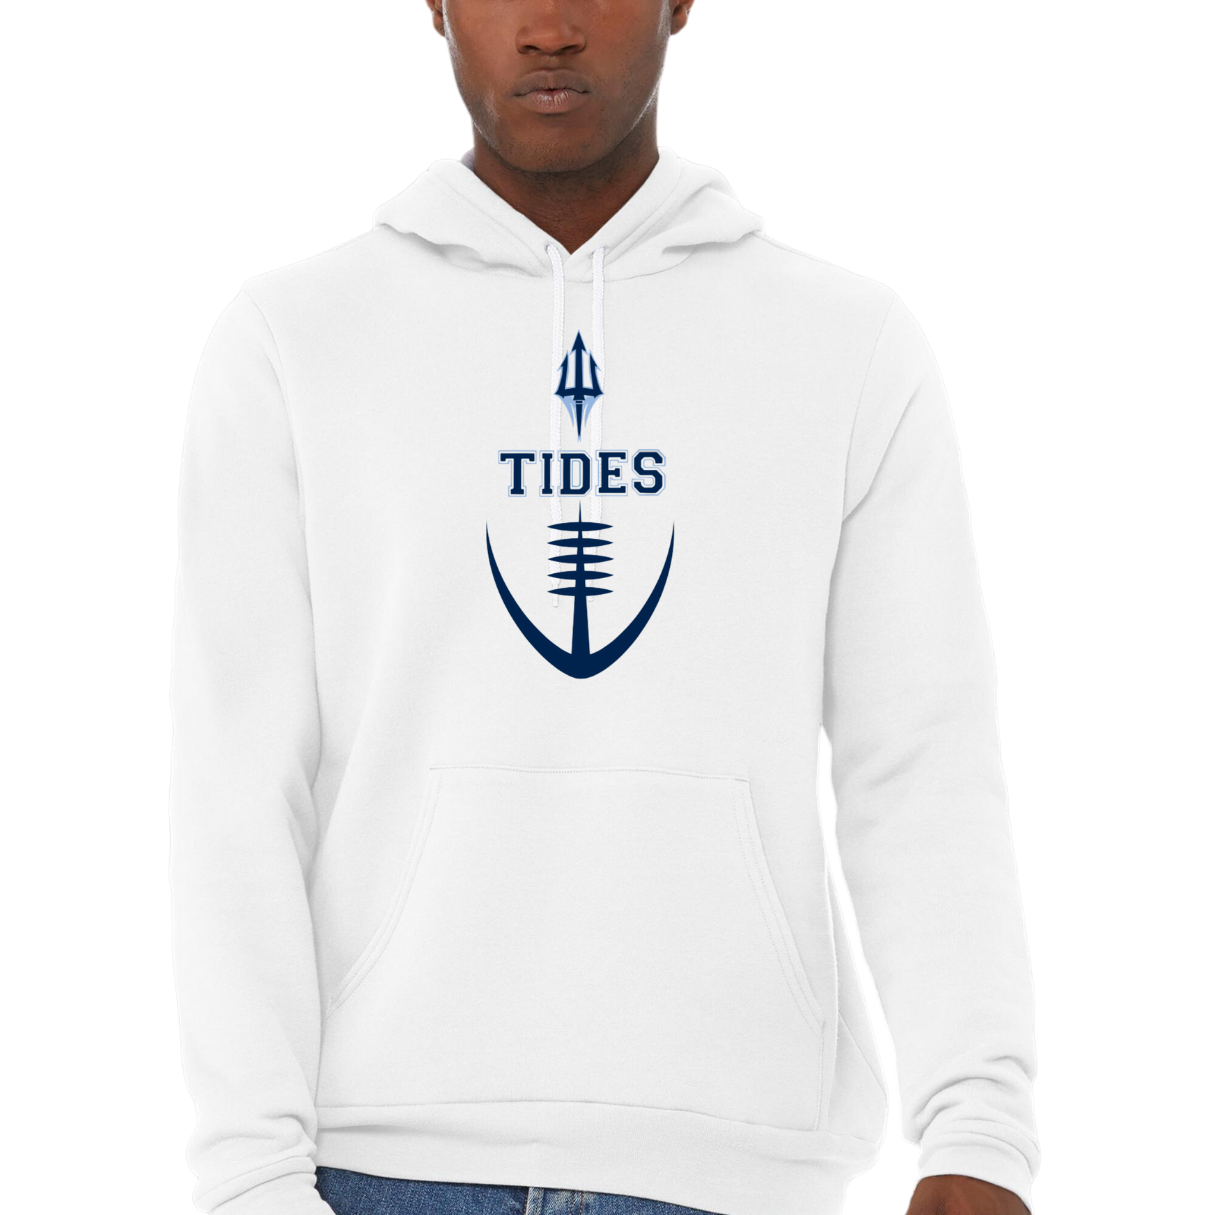 Tides Football Trident Hooded Sweatshirt - Adult and Youth